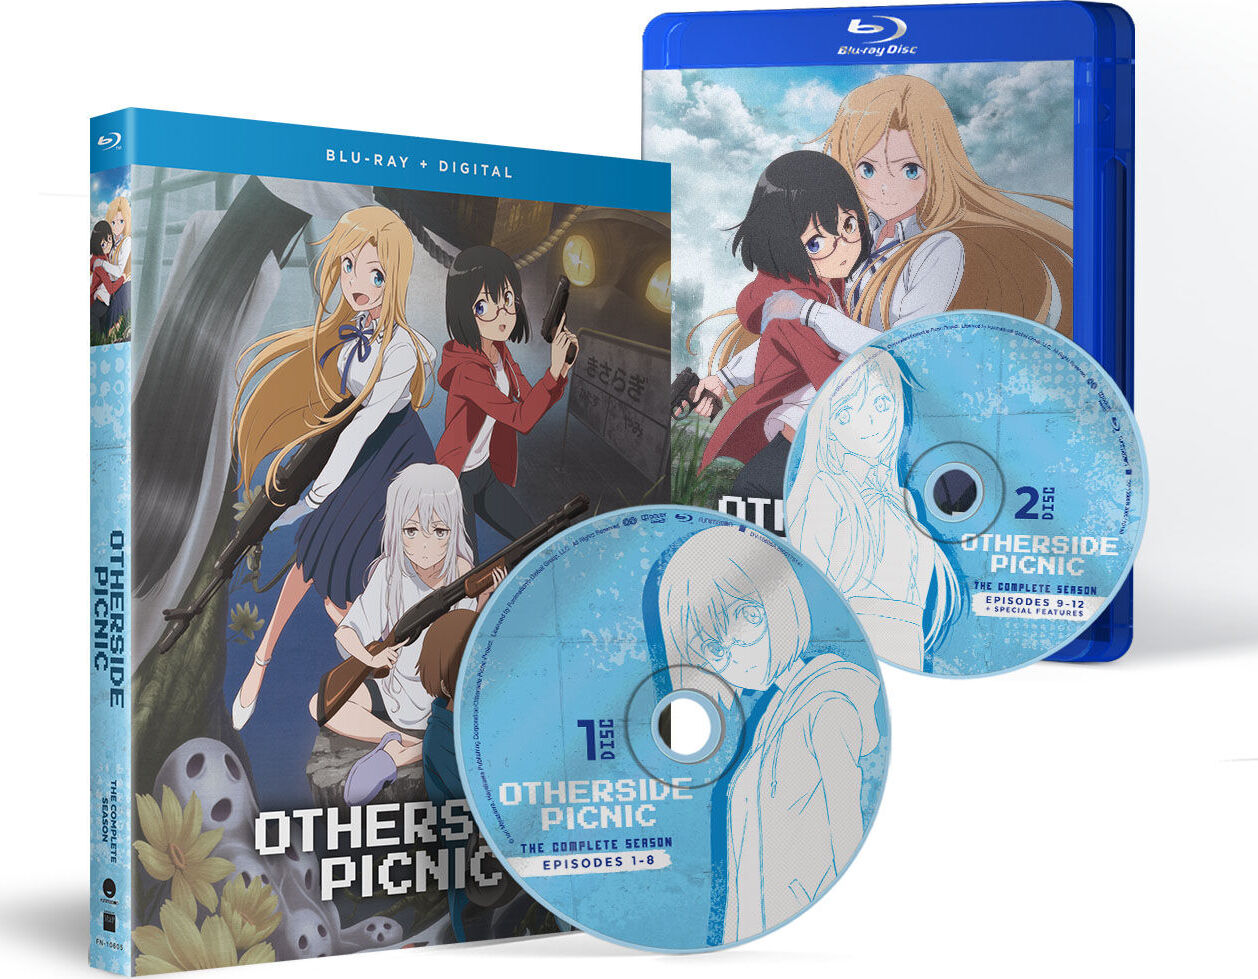 Otherside Picnic - The Complete Season - New on Blu-ray Disc